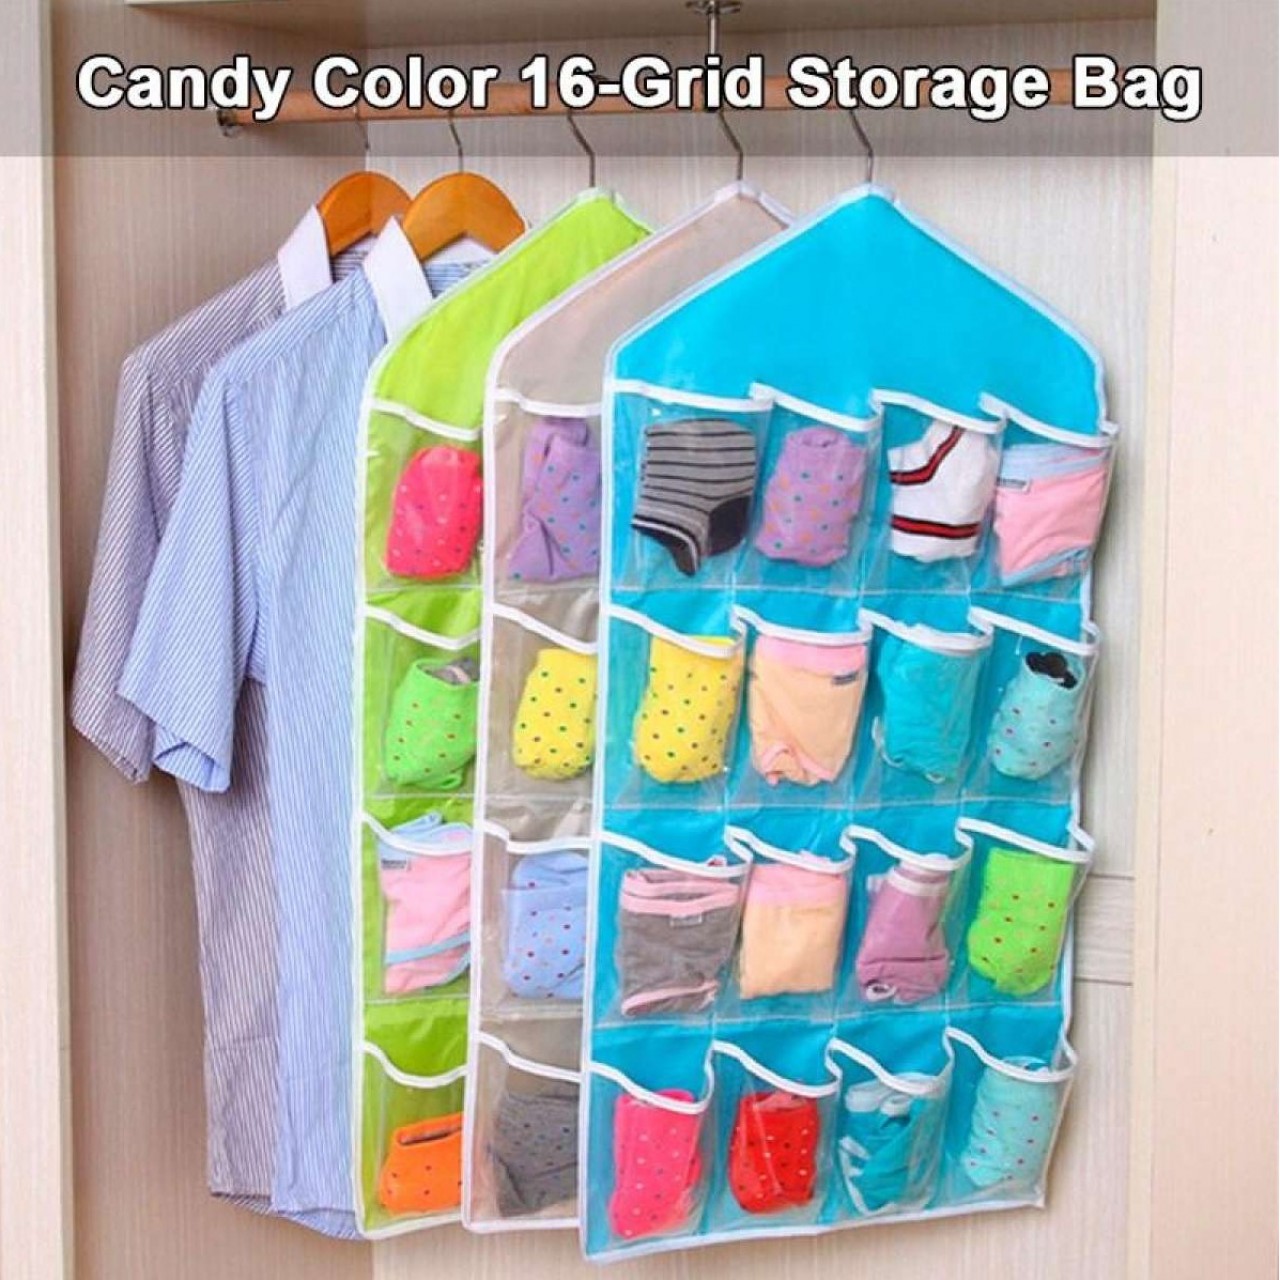 Candy Color Wardrobe Wall Mounted 16 Grid Storage Bag